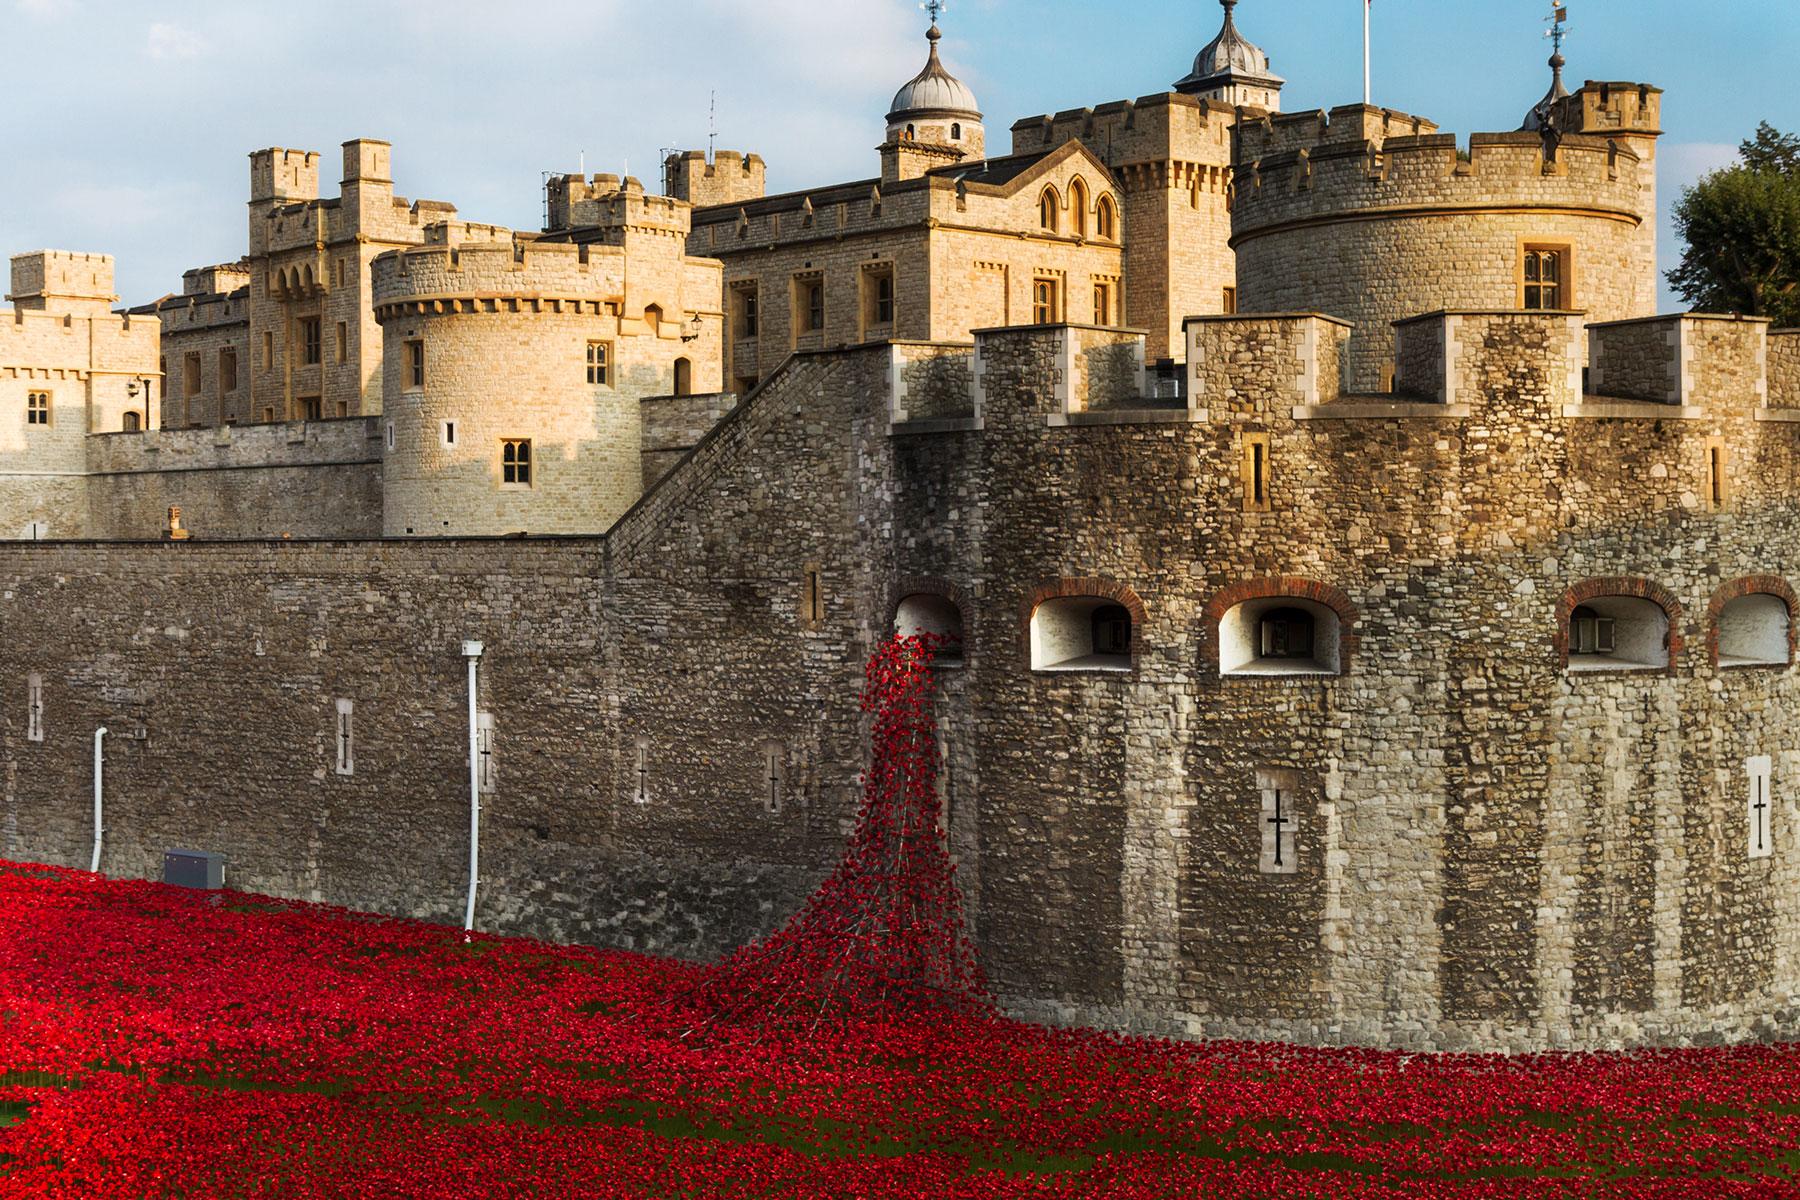 tower of london audio guide